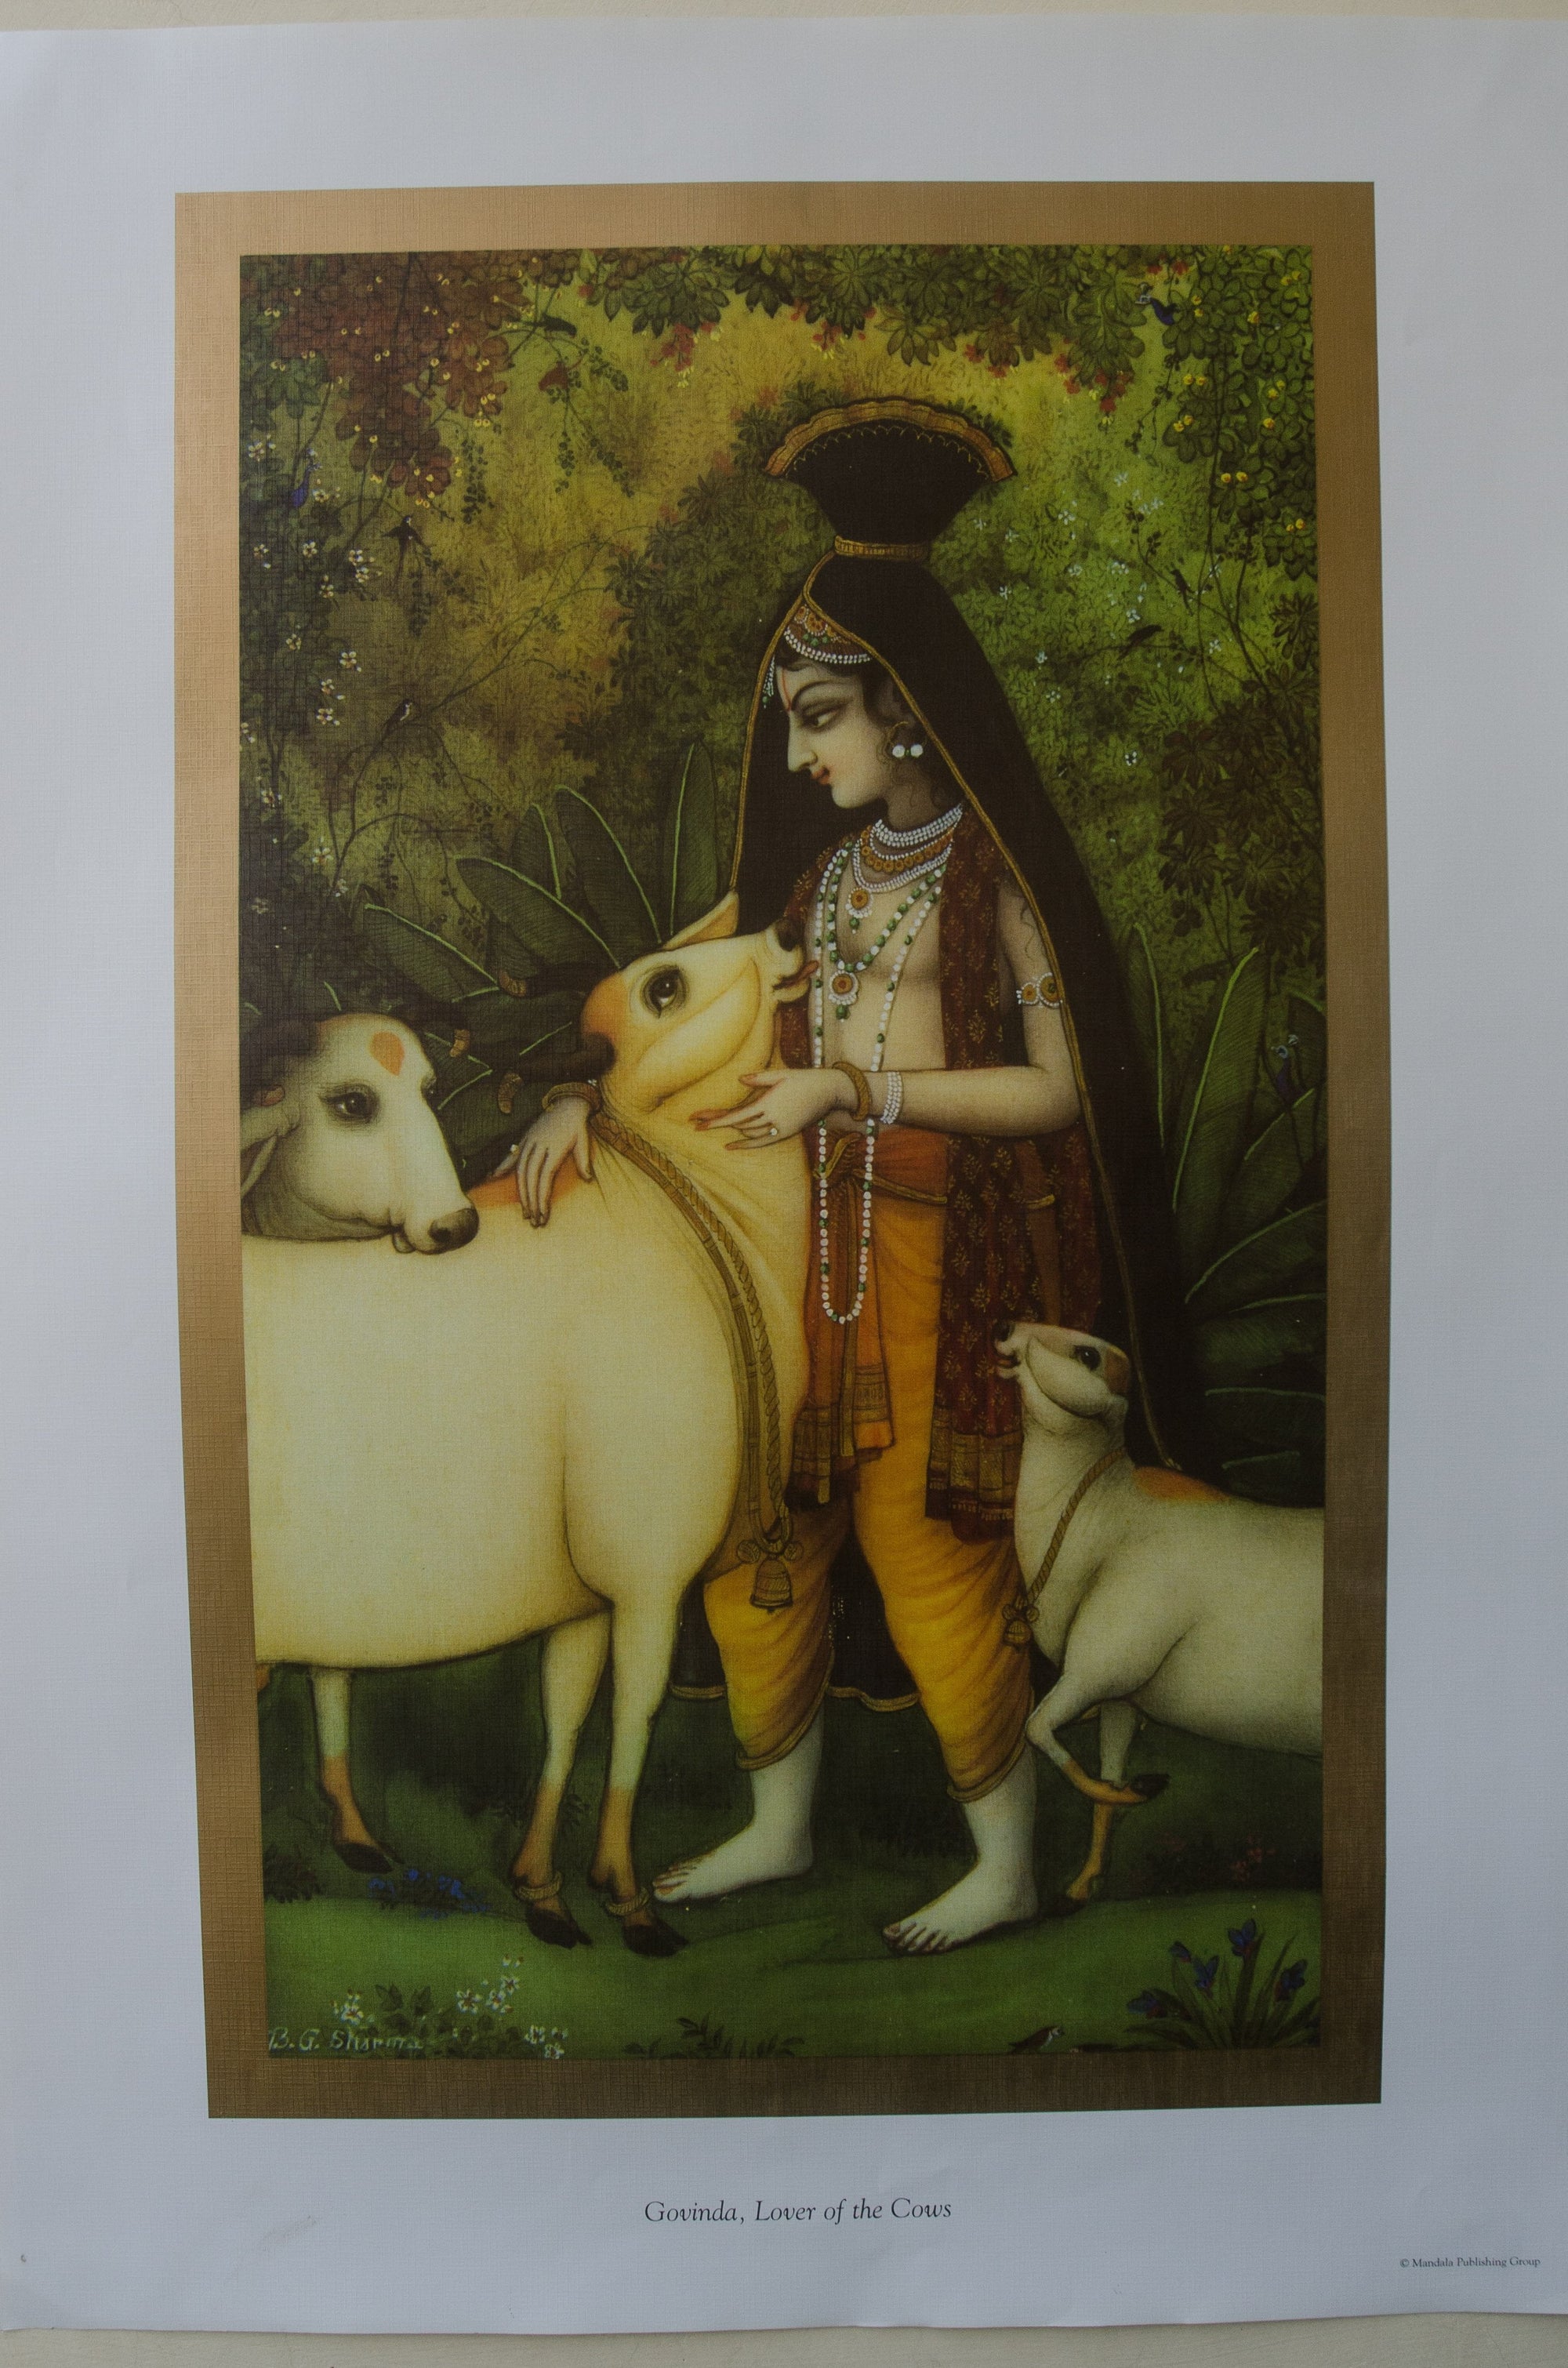  Govinda, Lover of the Cows Poster